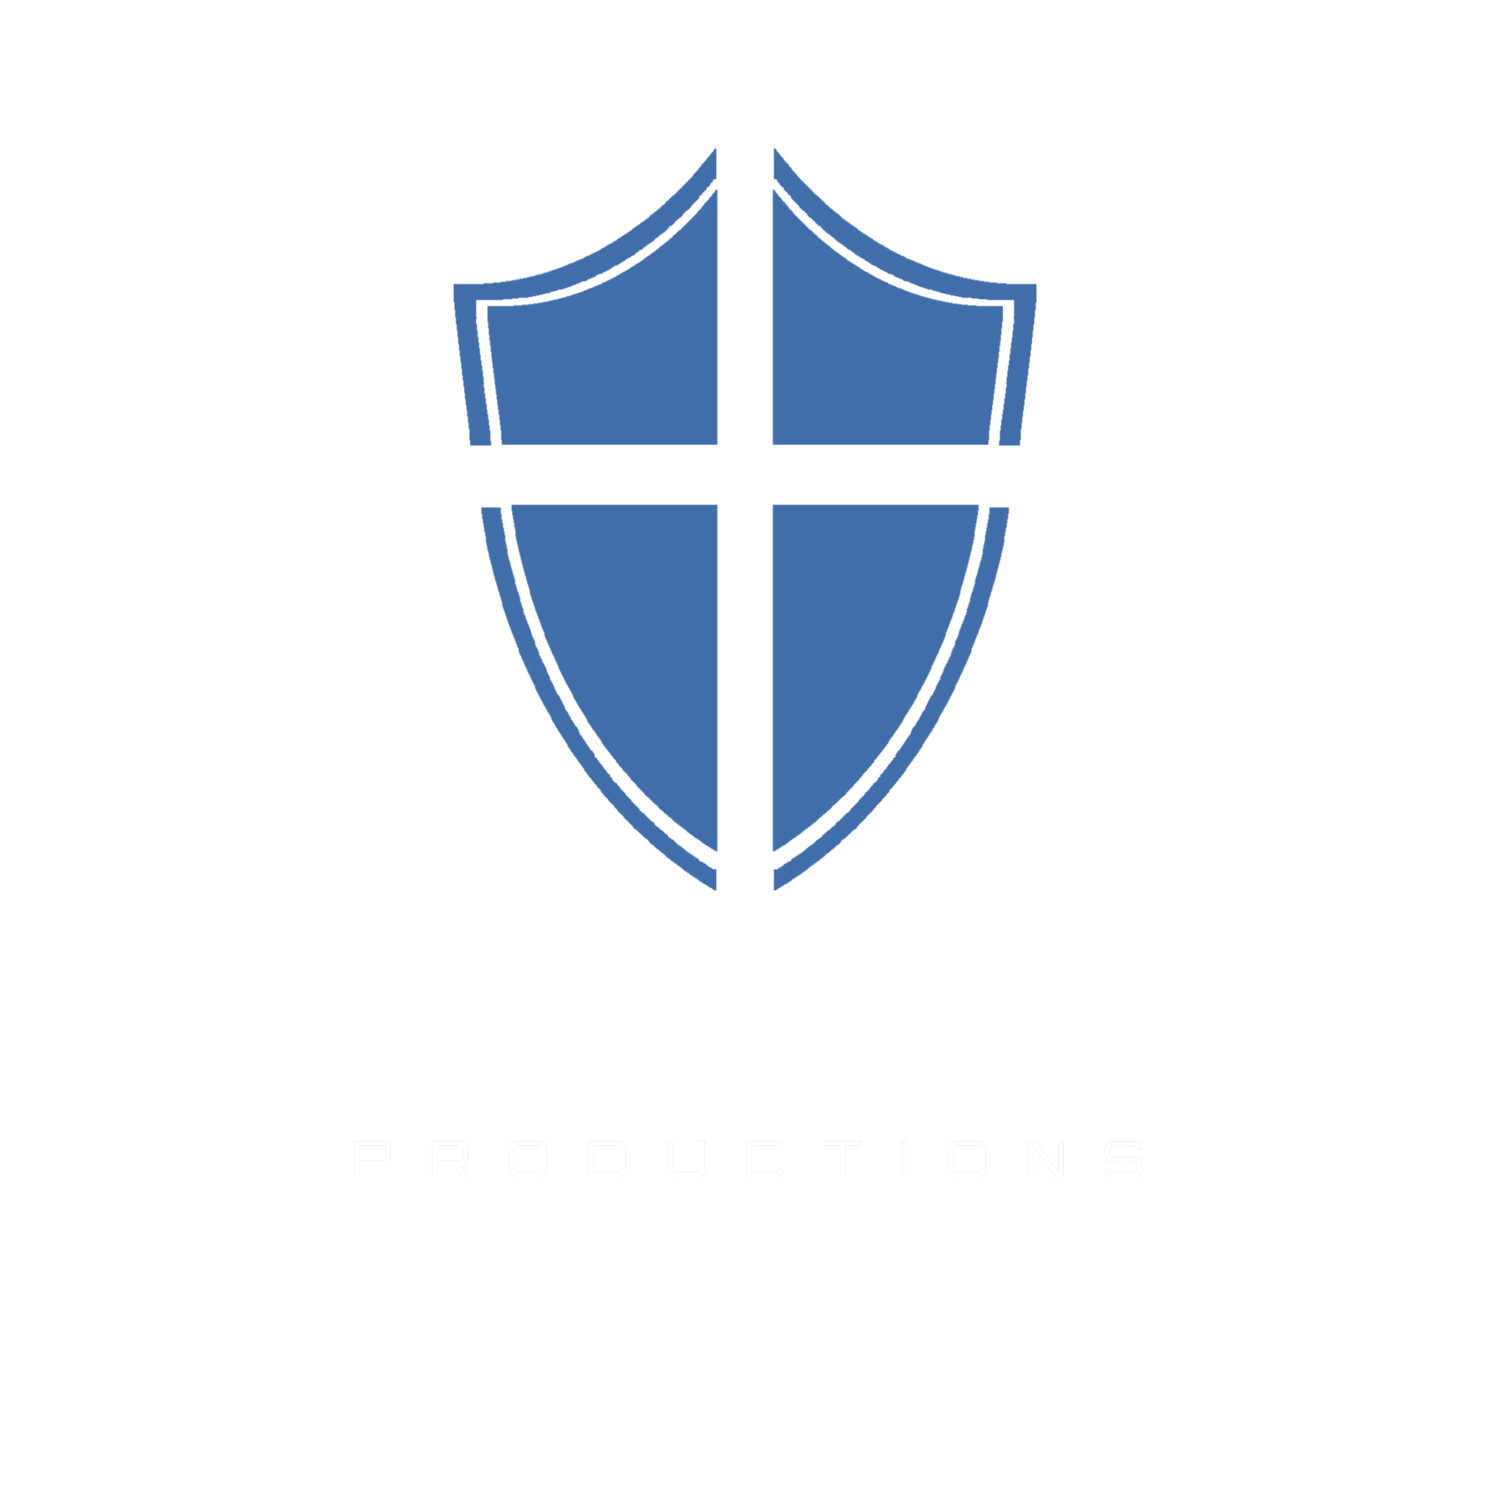 Brothers in Christ Productions